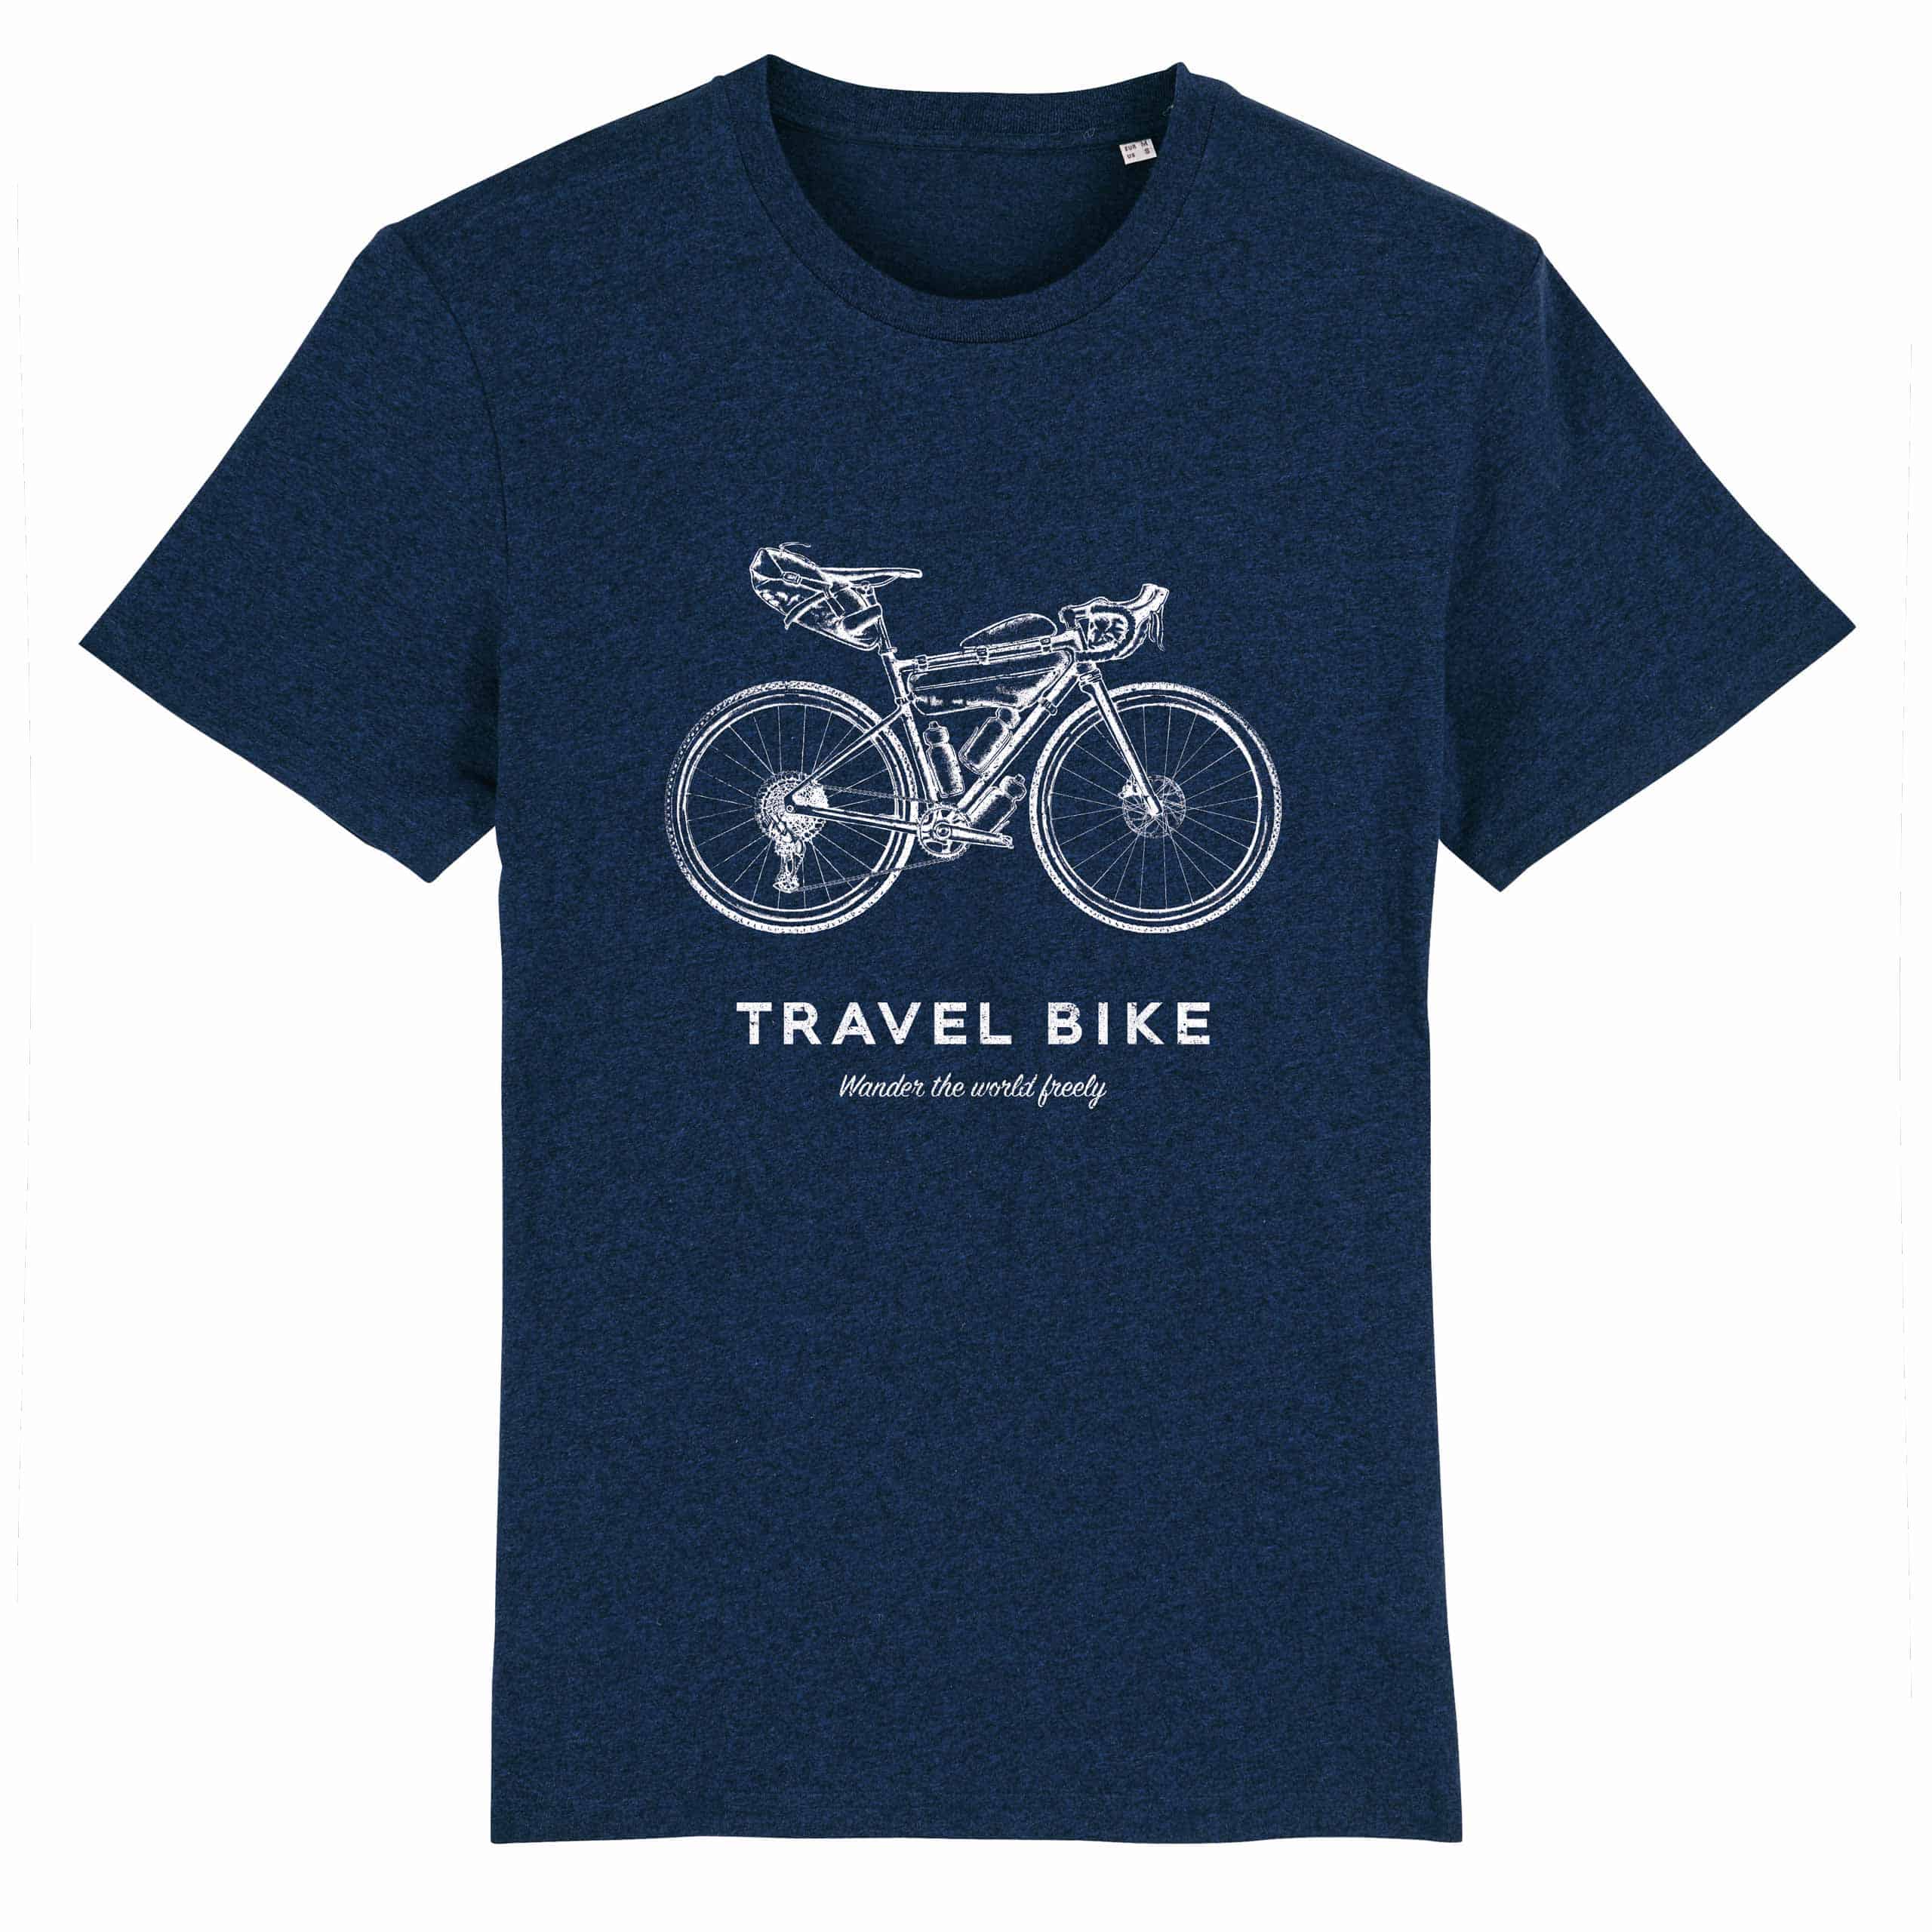 T-shirt cycling - Travel Bike Packing - Wander the world freely - collection cycling Live Freely. T-shirt basic medium fit 100% naturel col rond.